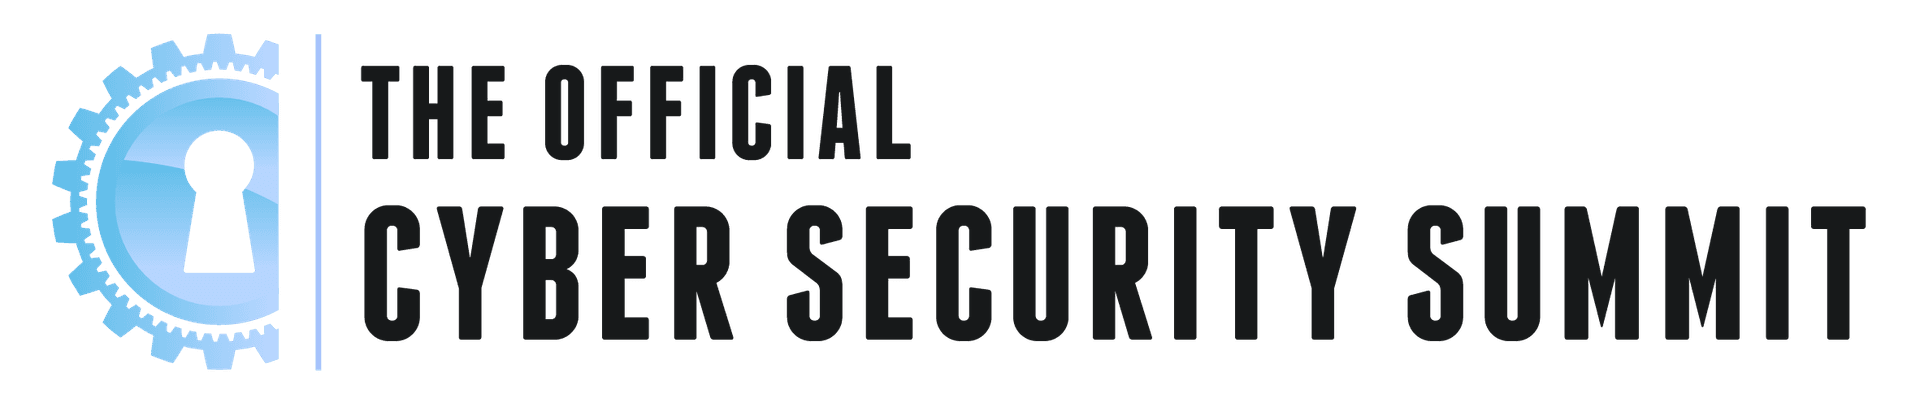 The Official Cyber Security Summit